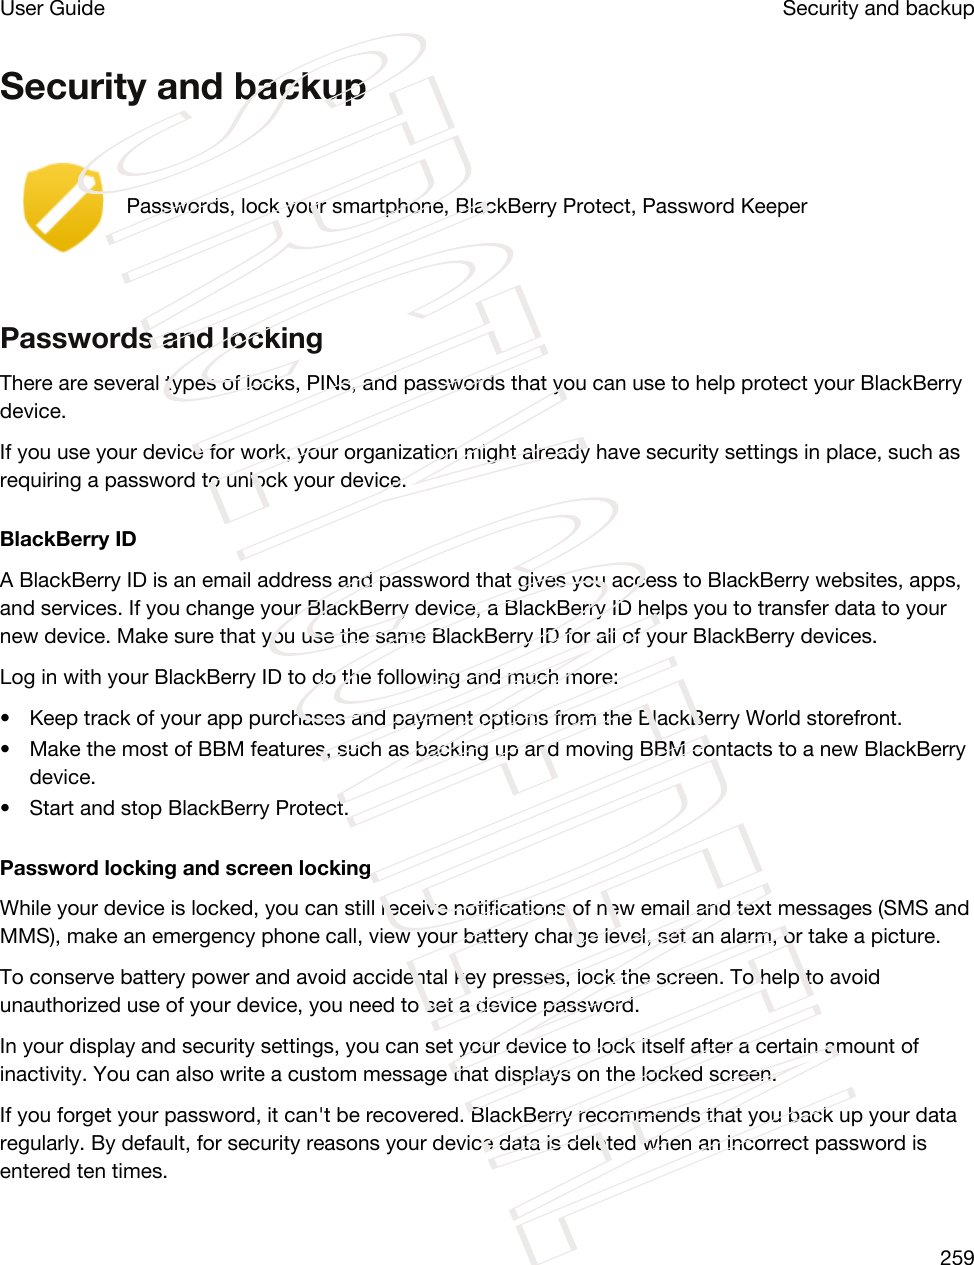 Security and backupPasswords, lock your smartphone, BlackBerry Protect, Password KeeperPasswords and lockingThere are several types of locks, PINs, and passwords that you can use to help protect your BlackBerry device.If you use your device for work, your organization might already have security settings in place, such as requiring a password to unlock your device.BlackBerry IDA BlackBerry ID is an email address and password that gives you access to BlackBerry websites, apps, and services. If you change your BlackBerry device, a BlackBerry ID helps you to transfer data to your new device. Make sure that you use the same BlackBerry ID for all of your BlackBerry devices.Log in with your BlackBerry ID to do the following and much more:• Keep track of your app purchases and payment options from the BlackBerry World storefront.• Make the most of BBM features, such as backing up and moving BBM contacts to a new BlackBerry device.• Start and stop BlackBerry Protect.Password locking and screen lockingWhile your device is locked, you can still receive notifications of new email and text messages (SMS and MMS), make an emergency phone call, view your battery charge level, set an alarm, or take a picture.To conserve battery power and avoid accidental key presses, lock the screen. To help to avoid unauthorized use of your device, you need to set a device password.In your display and security settings, you can set your device to lock itself after a certain amount of inactivity. You can also write a custom message that displays on the locked screen.If you forget your password, it can&apos;t be recovered. BlackBerry recommends that you back up your data regularly. By default, for security reasons your device data is deleted when an incorrect password is entered ten times.Security and backupUser Guide259STRICTLY CONFIDENTIAL